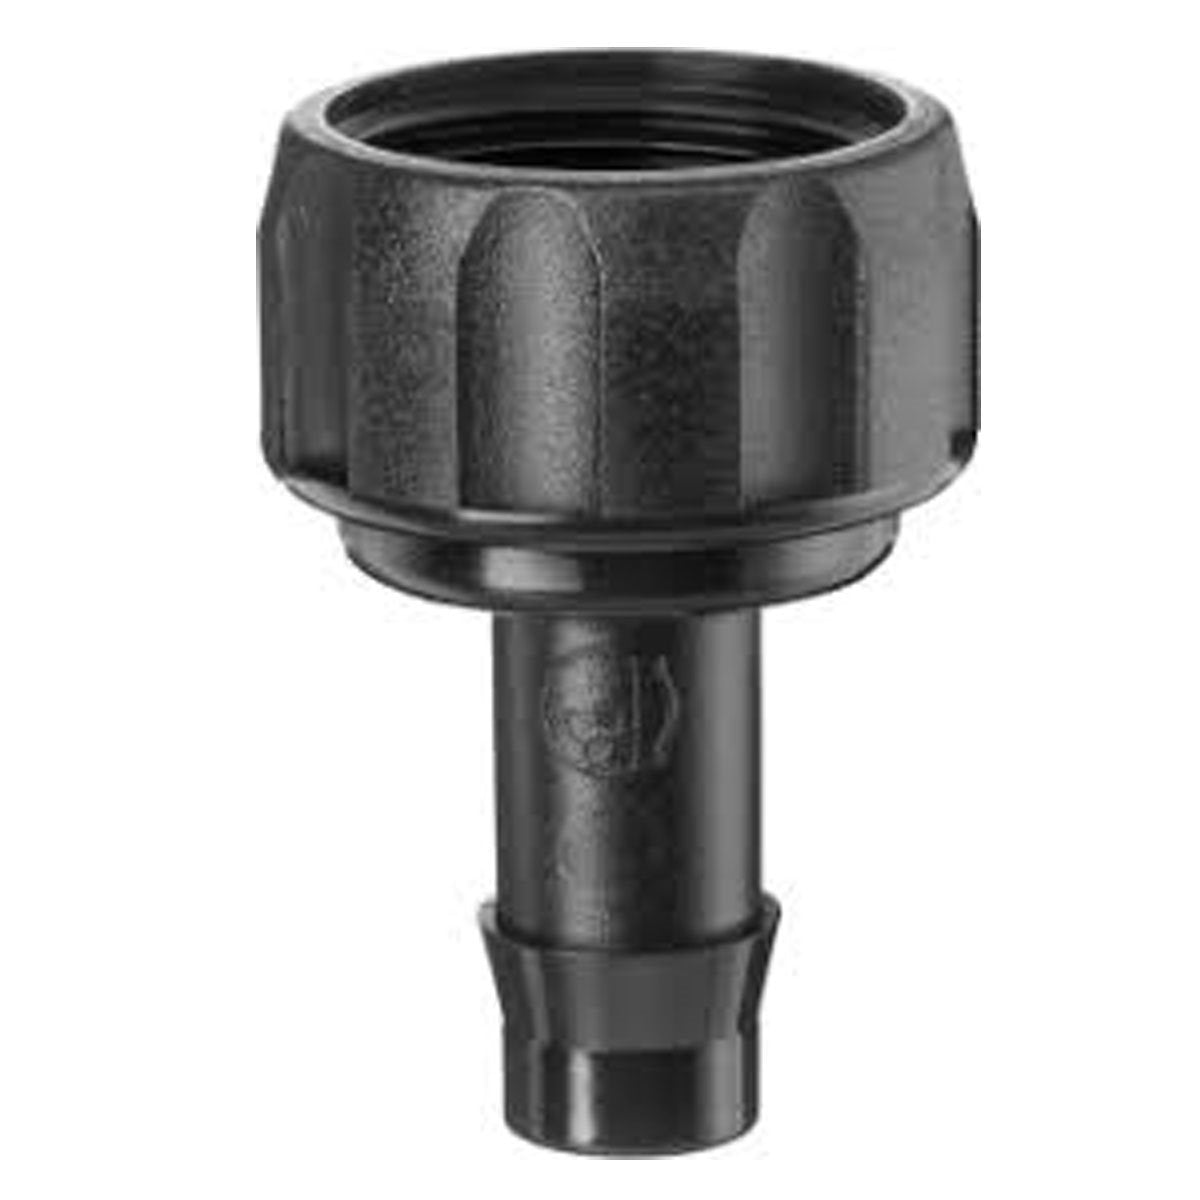 Antelco Tap 3 4 to 1 2 Barb Adapter-canada-grow-supplies